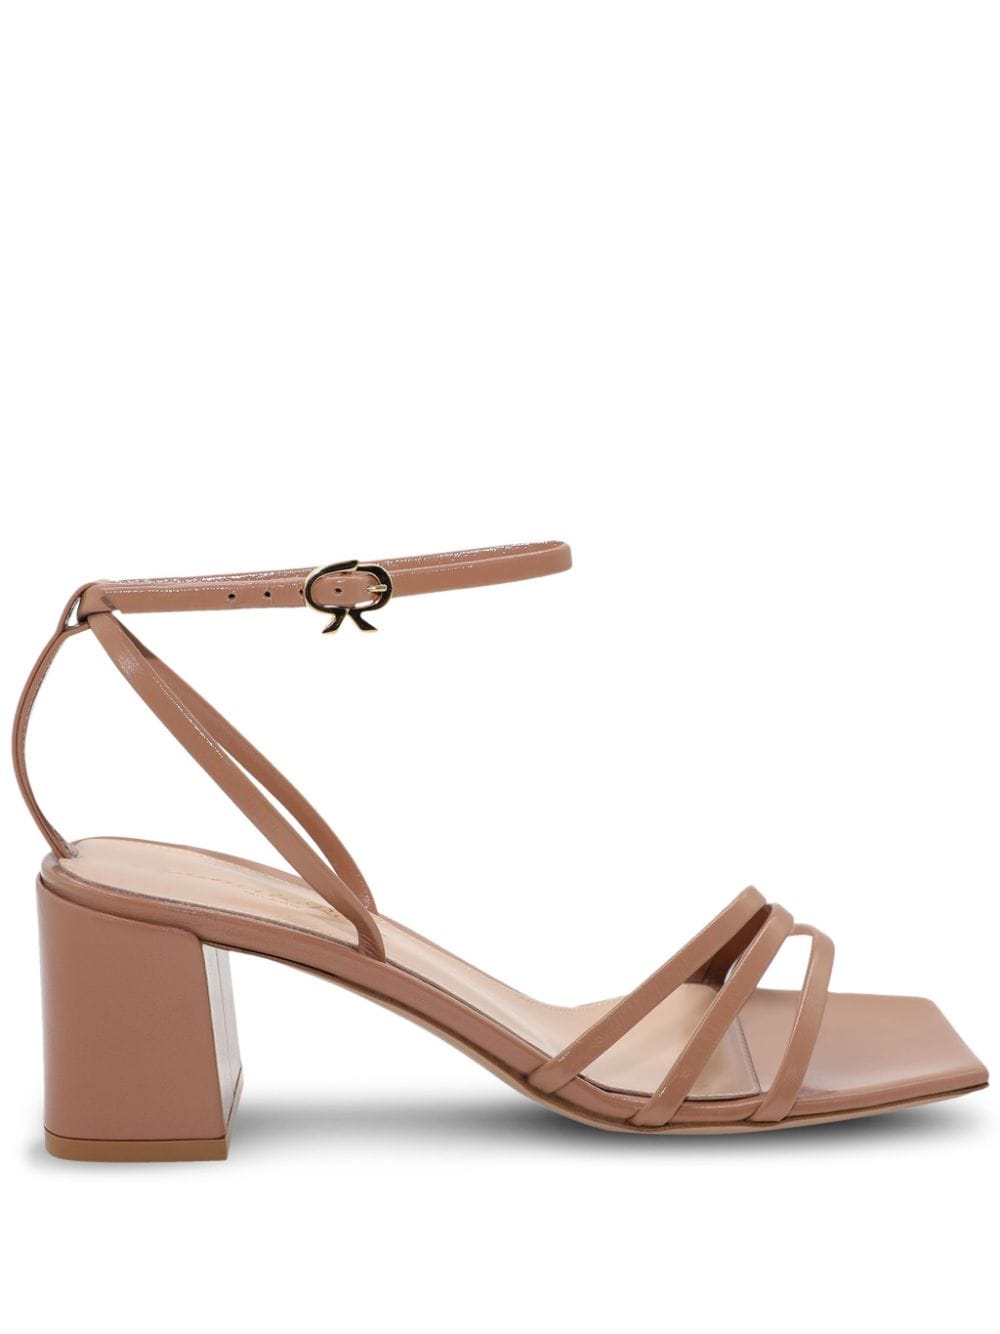 Gianvito Rossi Nuit 55mm Leather Sandals In Brown